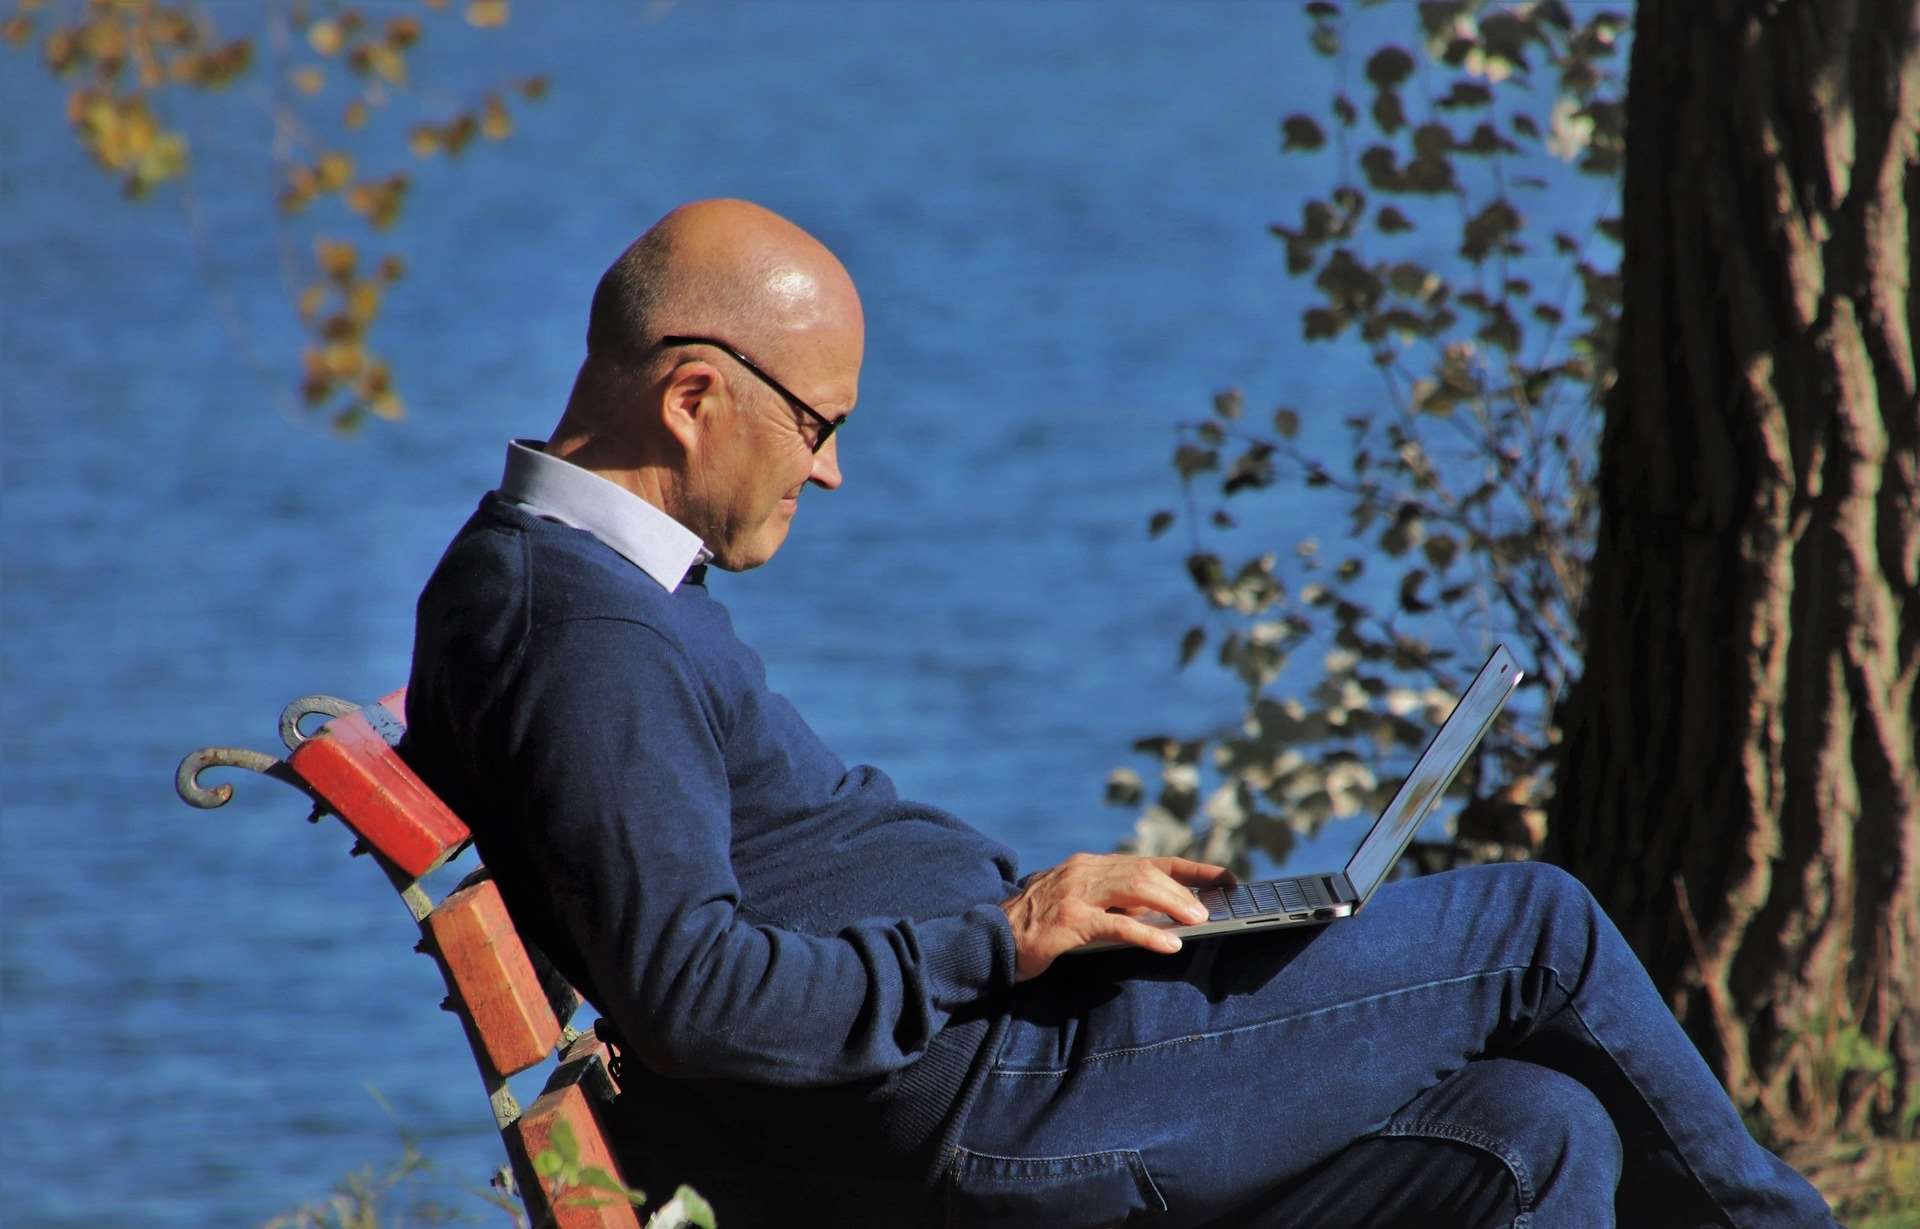 man_on_laptop_in_nature_video_consultation_therapy_psychologist